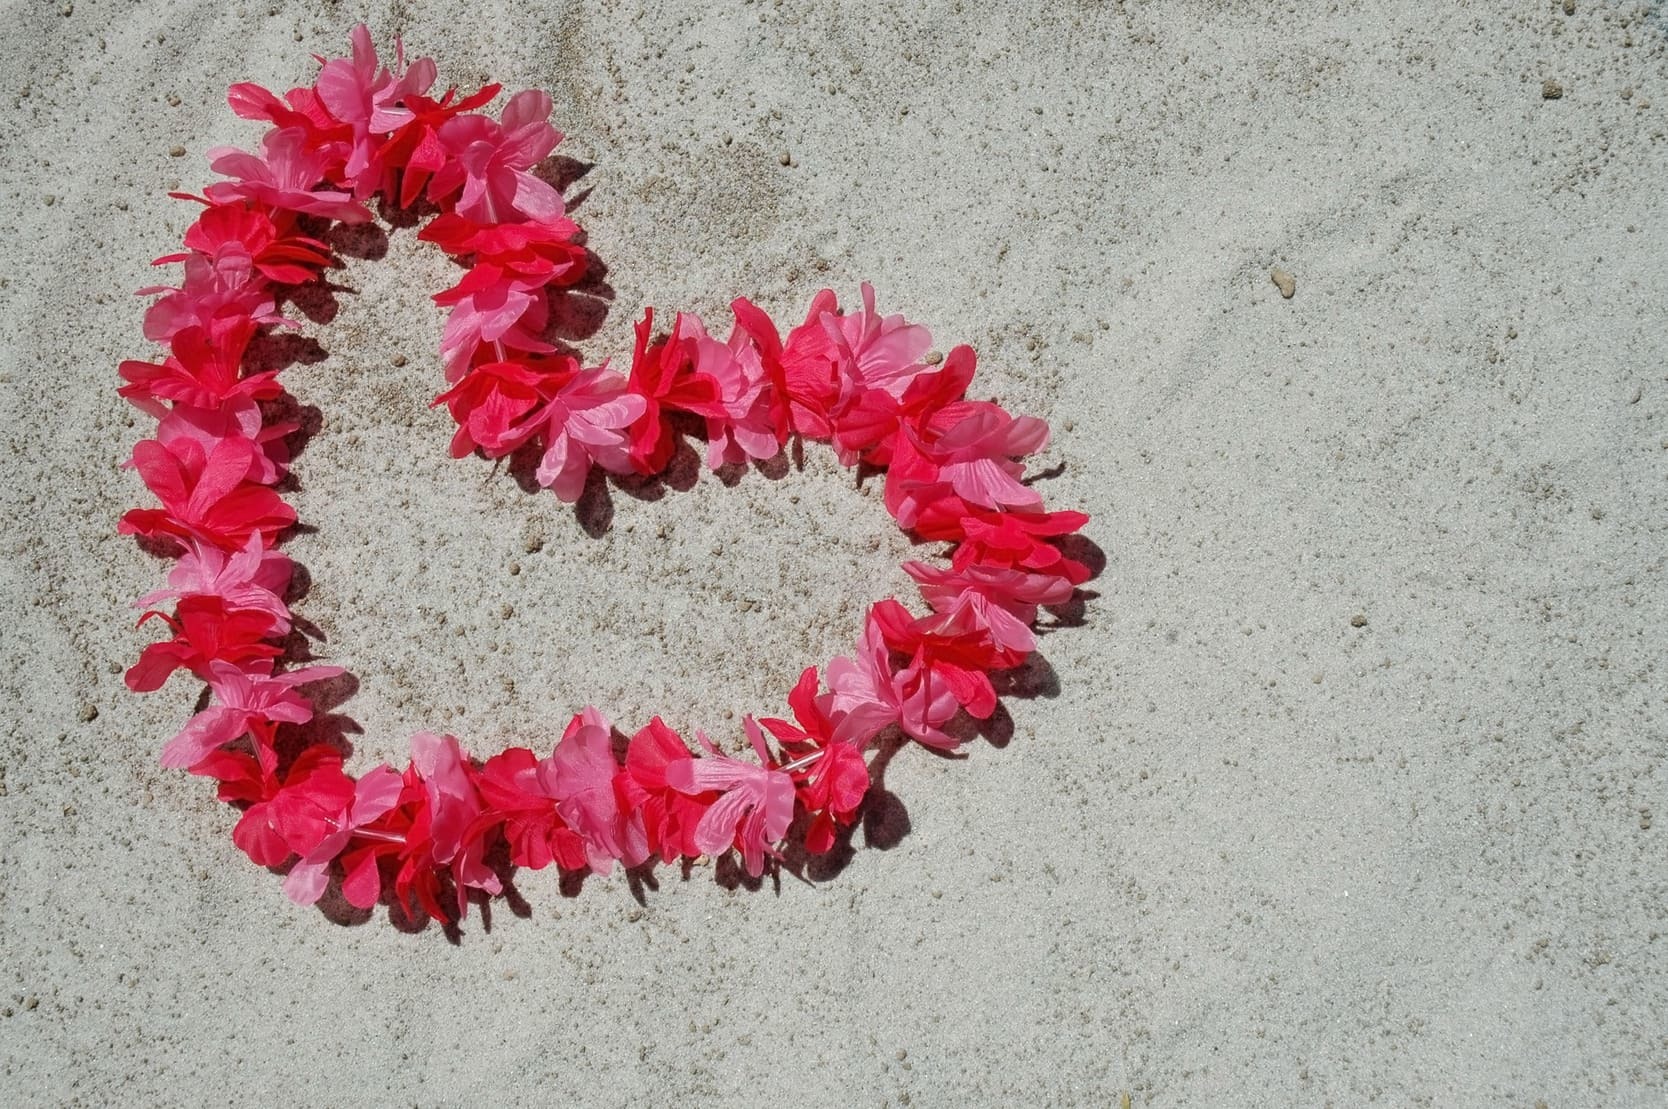 Heart made out of a flowered lei on a beach in Florida